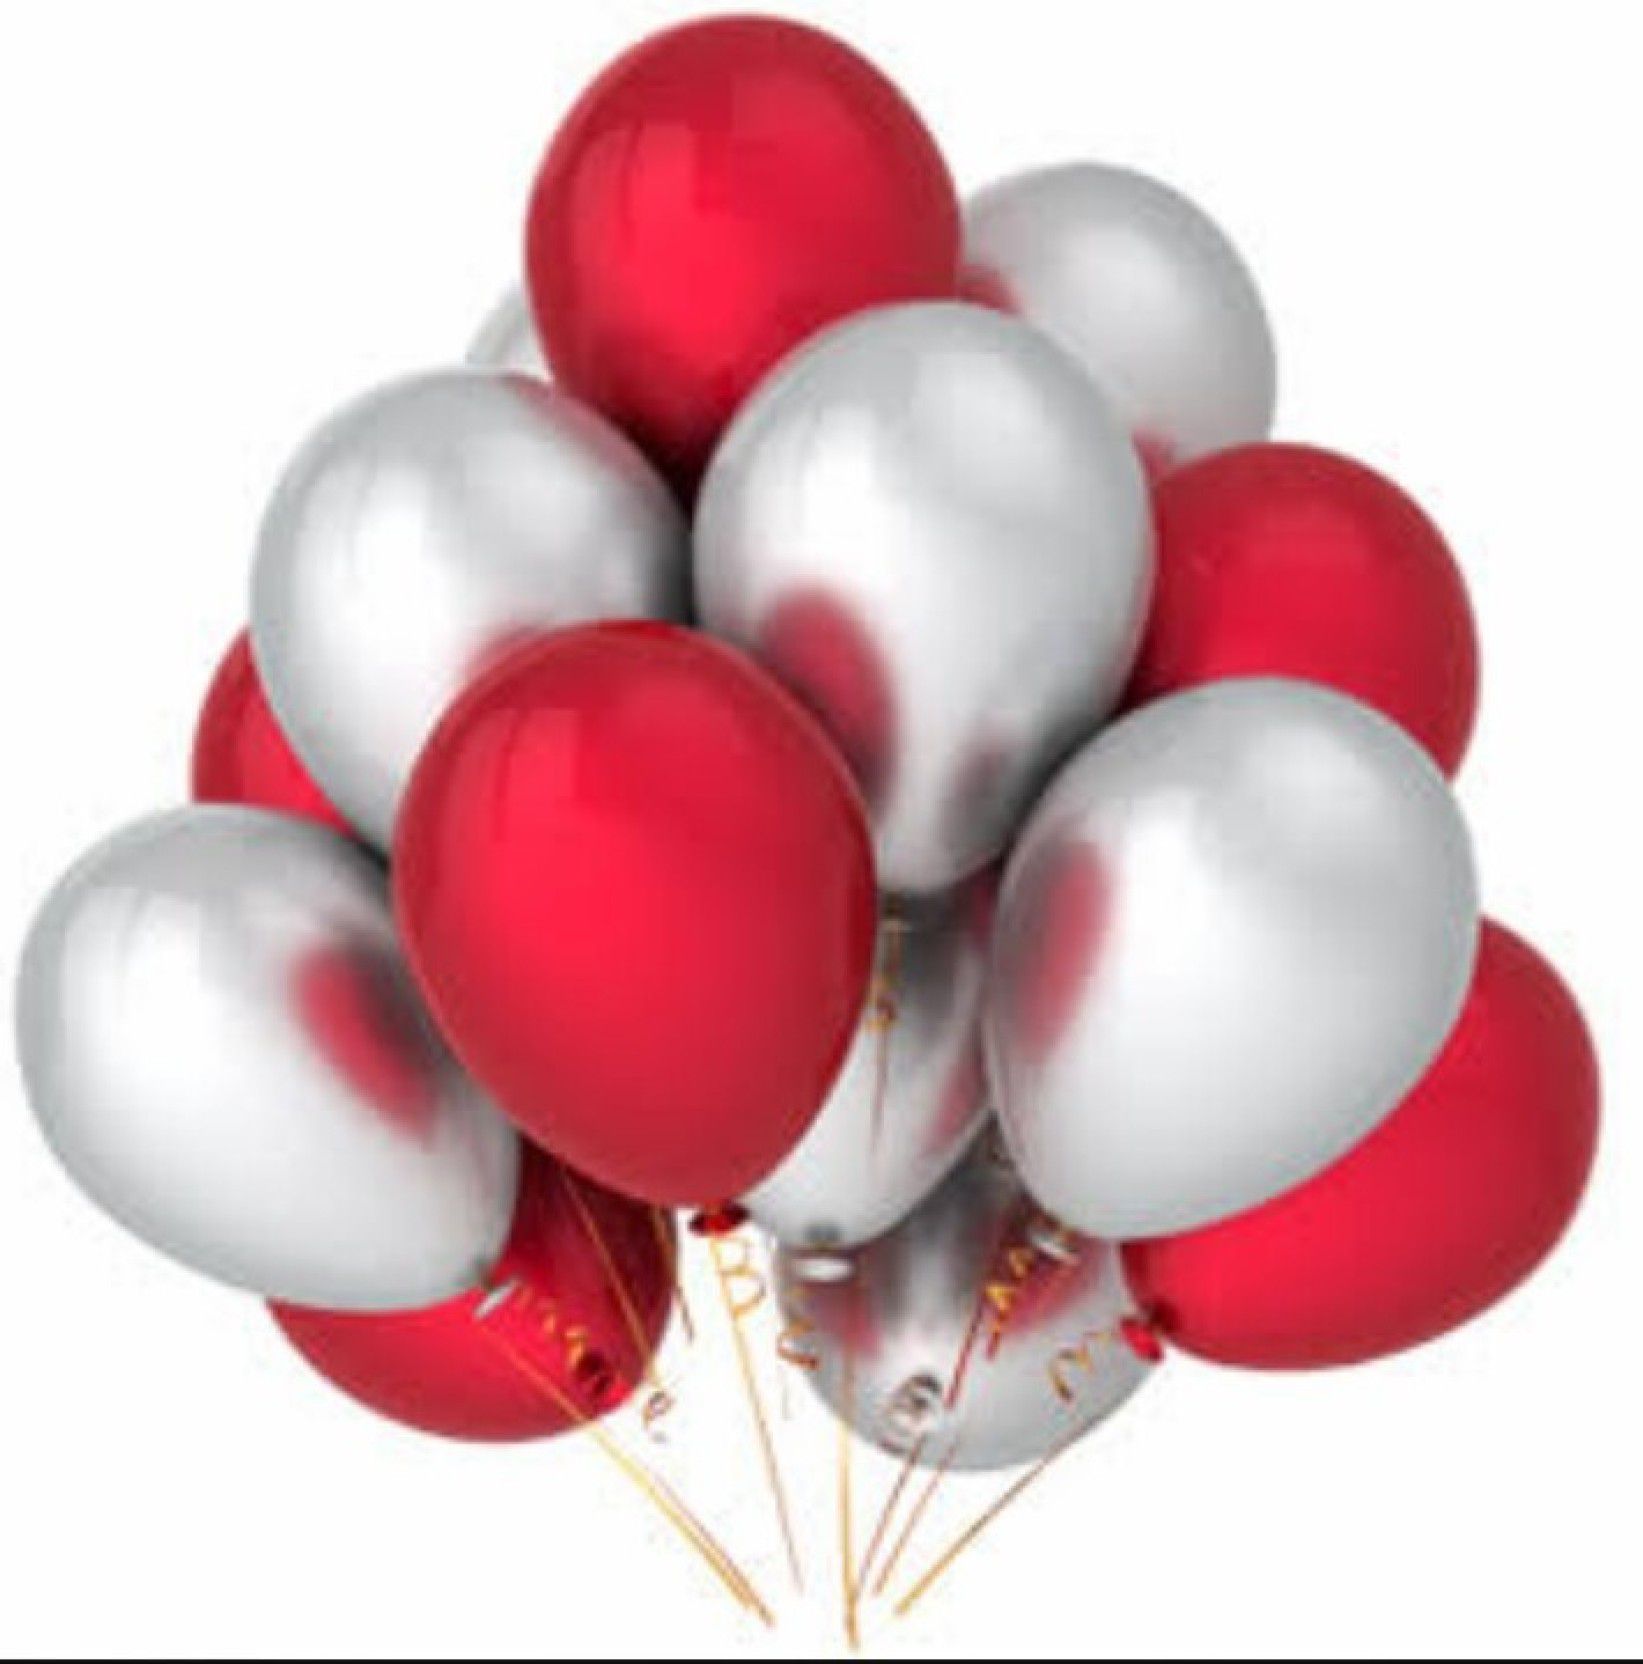     			Solid Metallic Balloons  (Red, Silver Pack of 100) FREE Banner